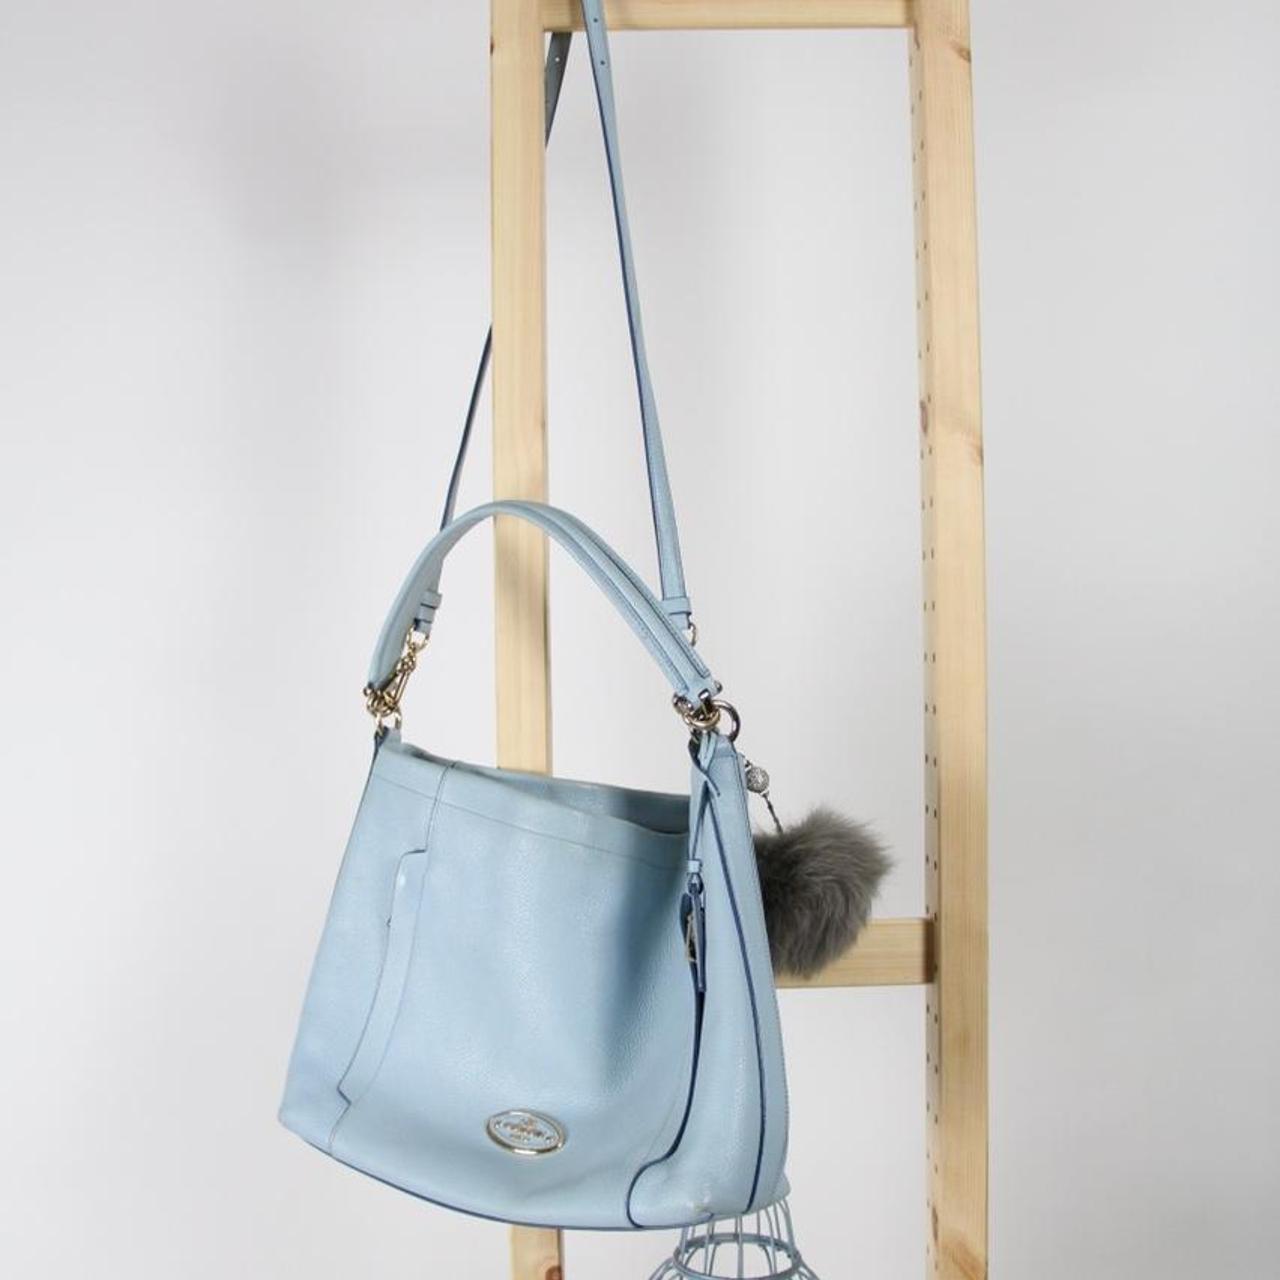 Best Auth Coach Bag Blue Color for sale in San Jose, California for 2023